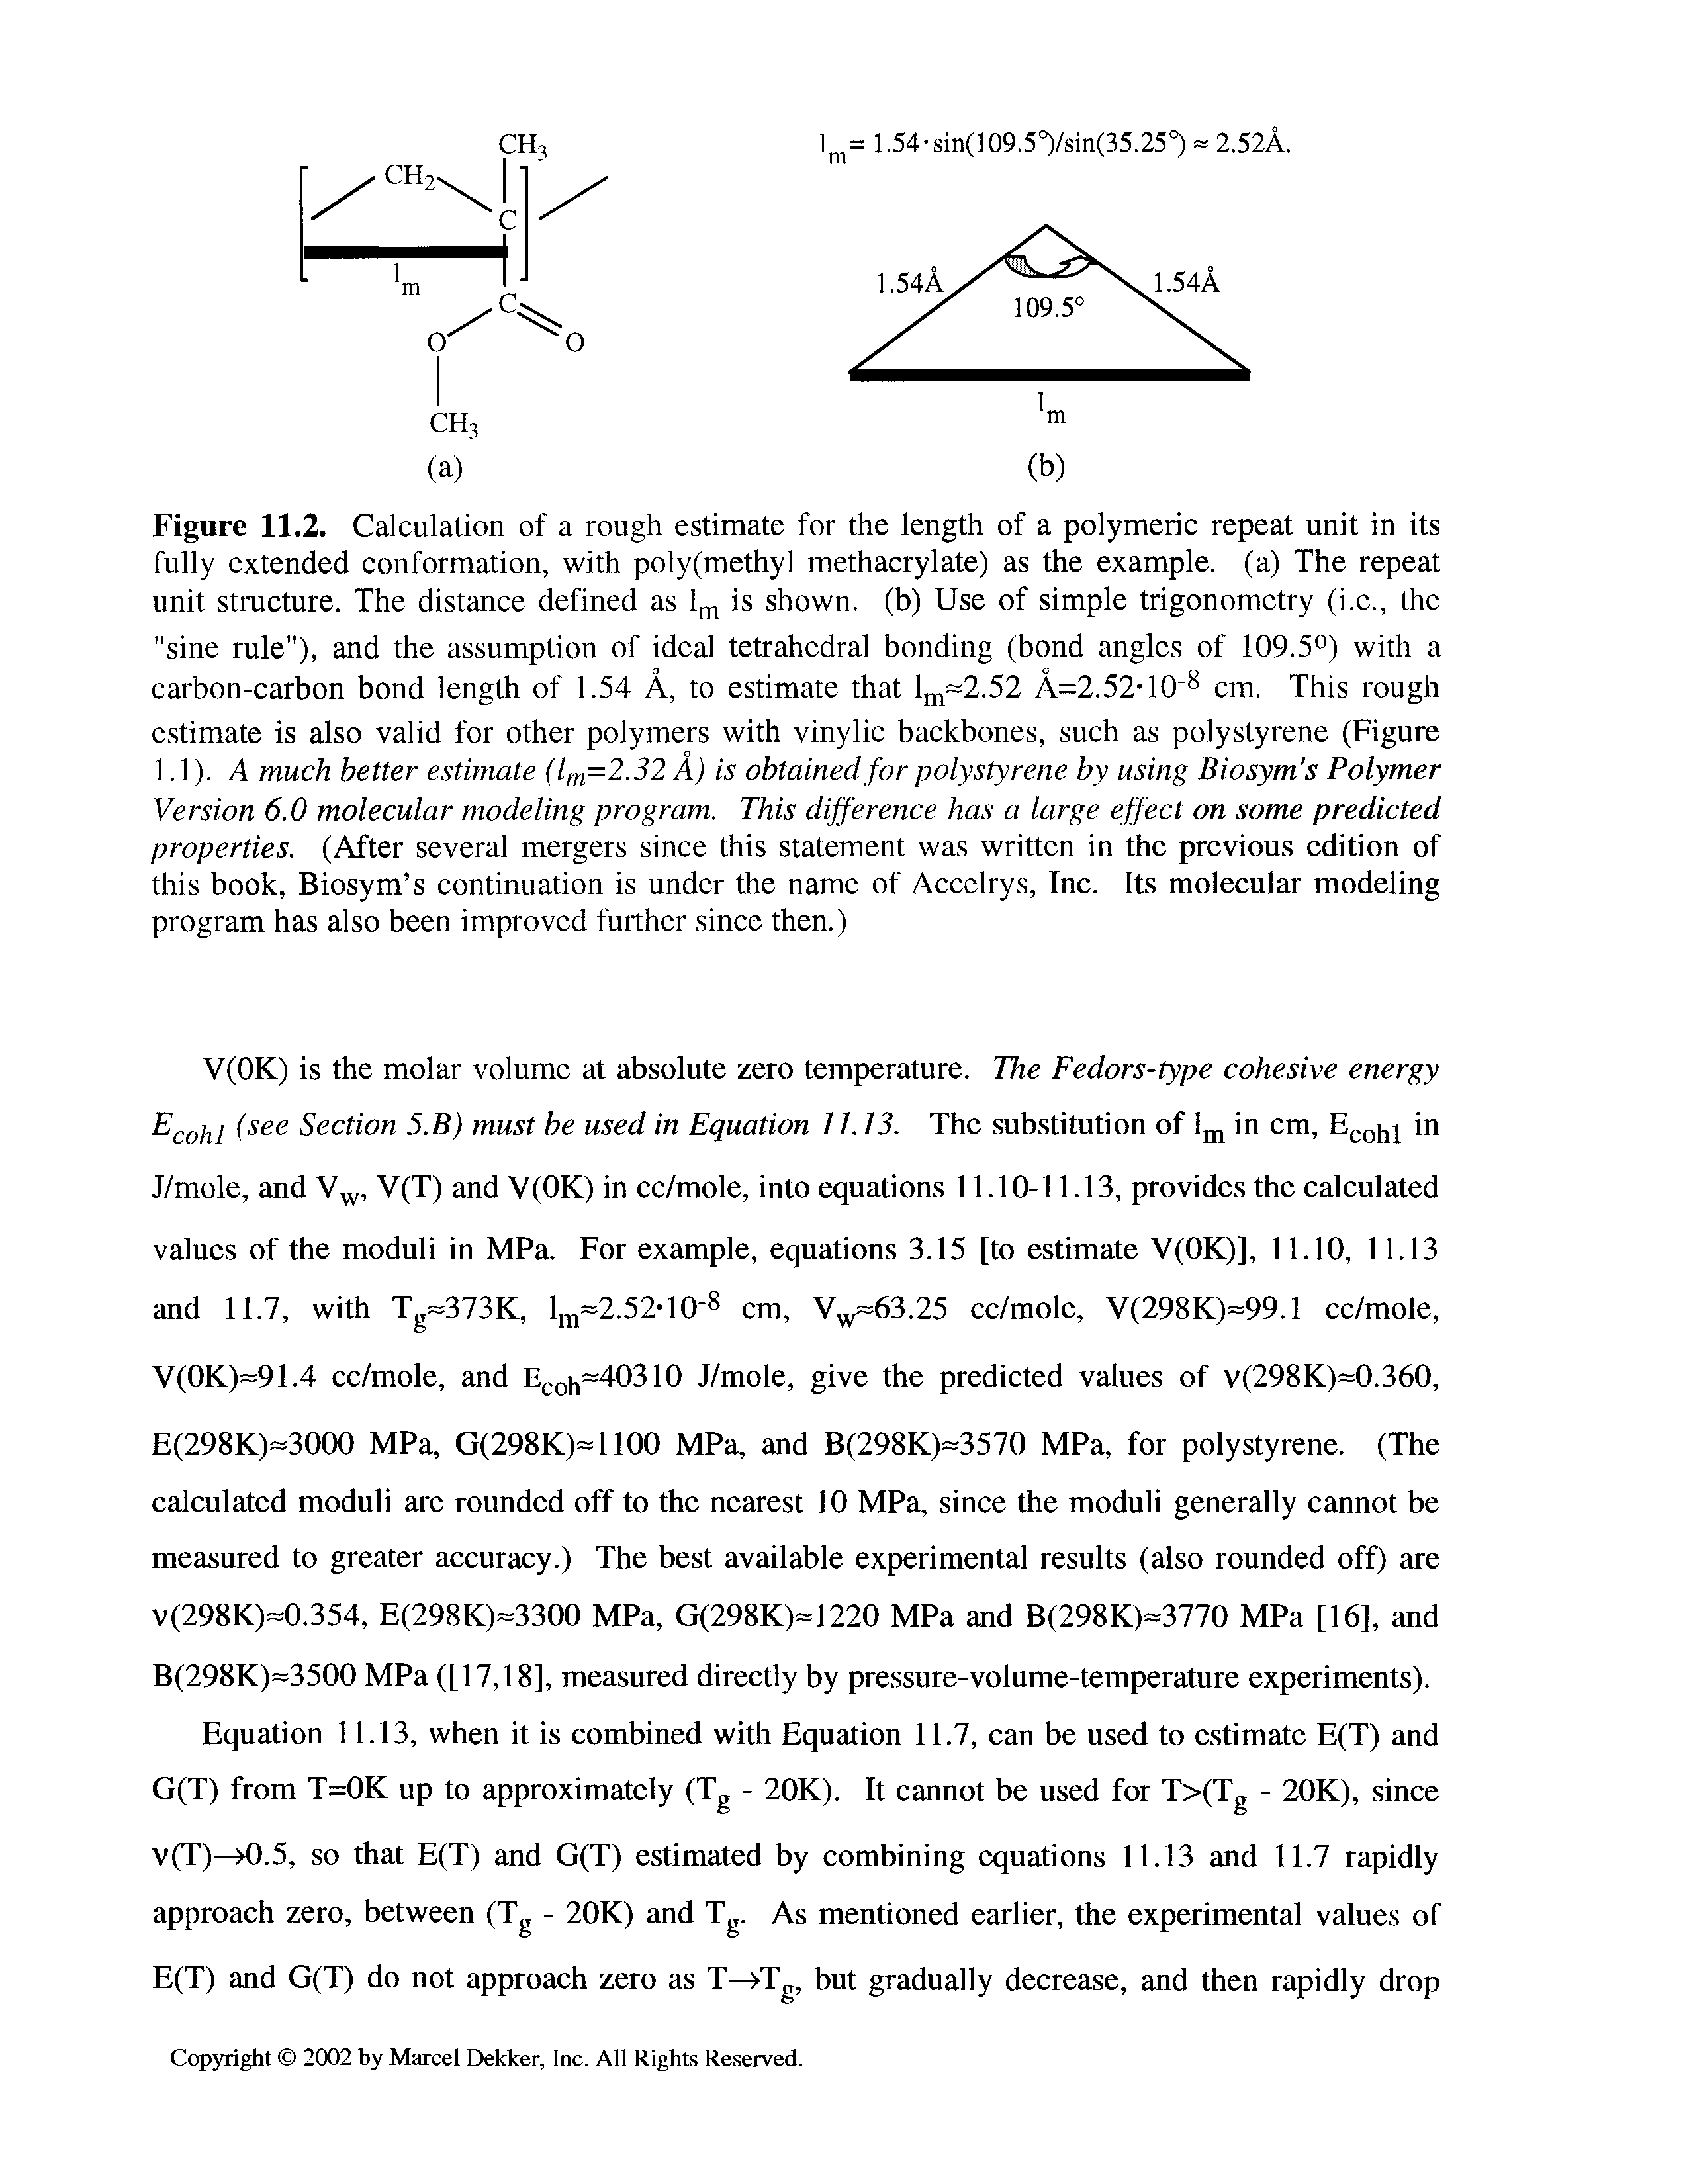 Figure 11.2. Calculation of a rough estimate for the length of a polymeric repeat unit in its fully extended conformation, with poly(methyl methacrylate) as the example, (a) The repeat unit structure. The distance defined as lm is shown, (b) Use of simple trigonometry (i.e., the...